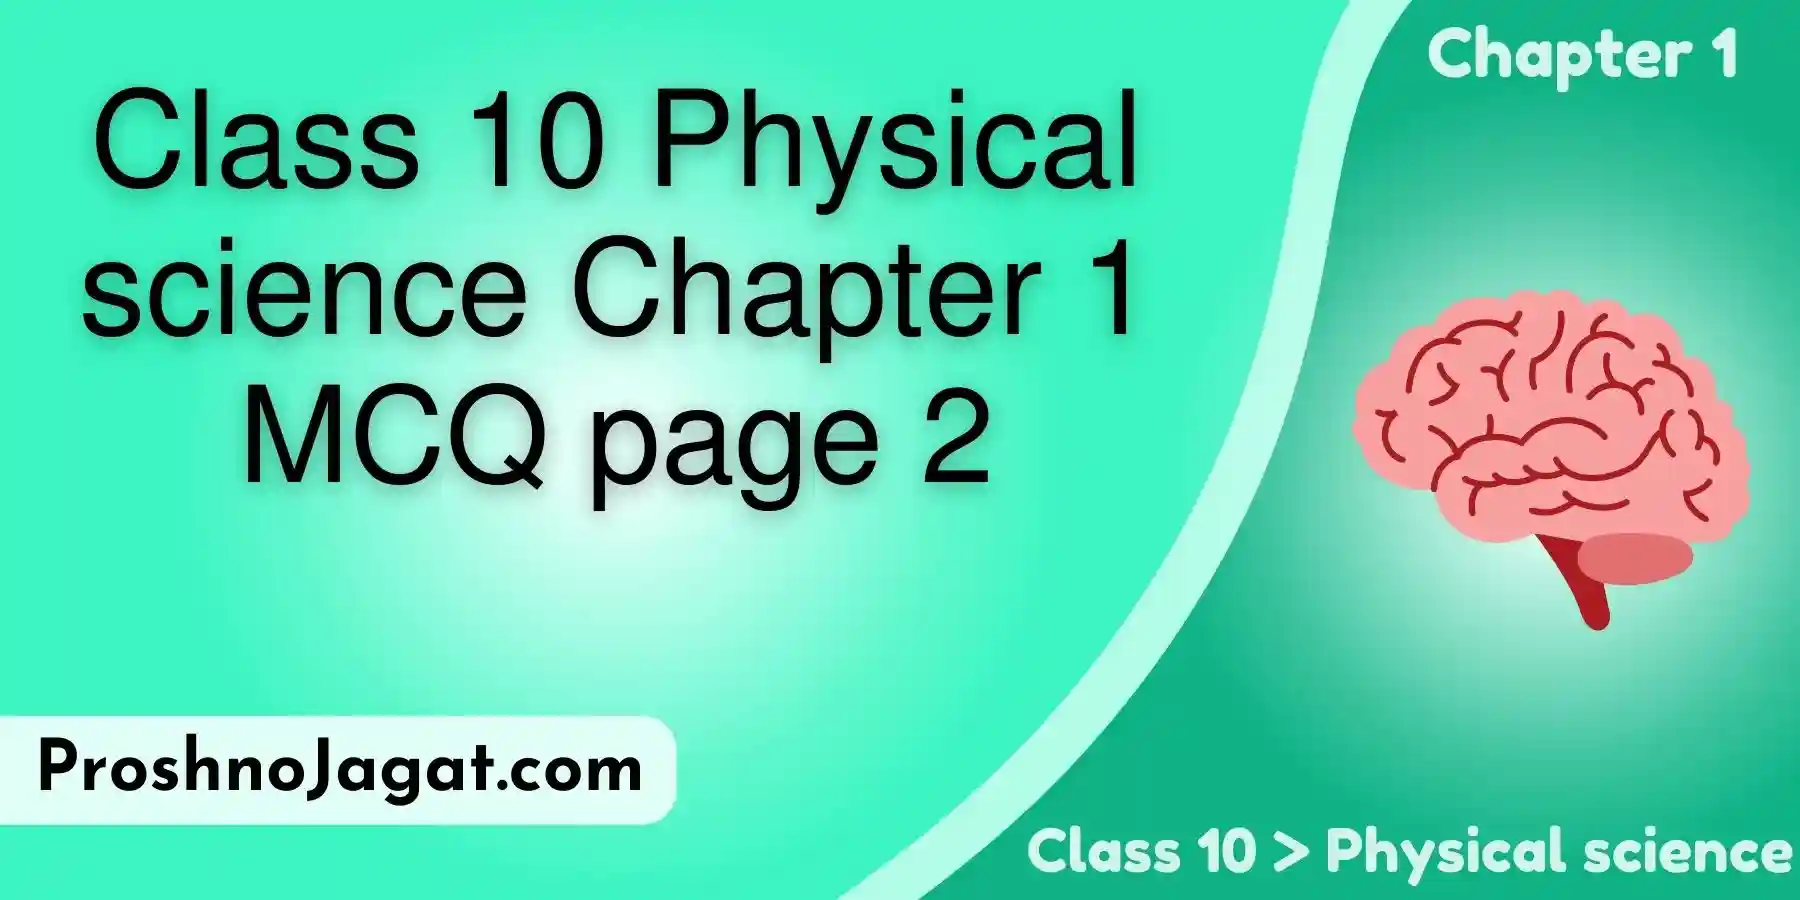 Class 10 Physical science Chapter 1 MCQ page 2